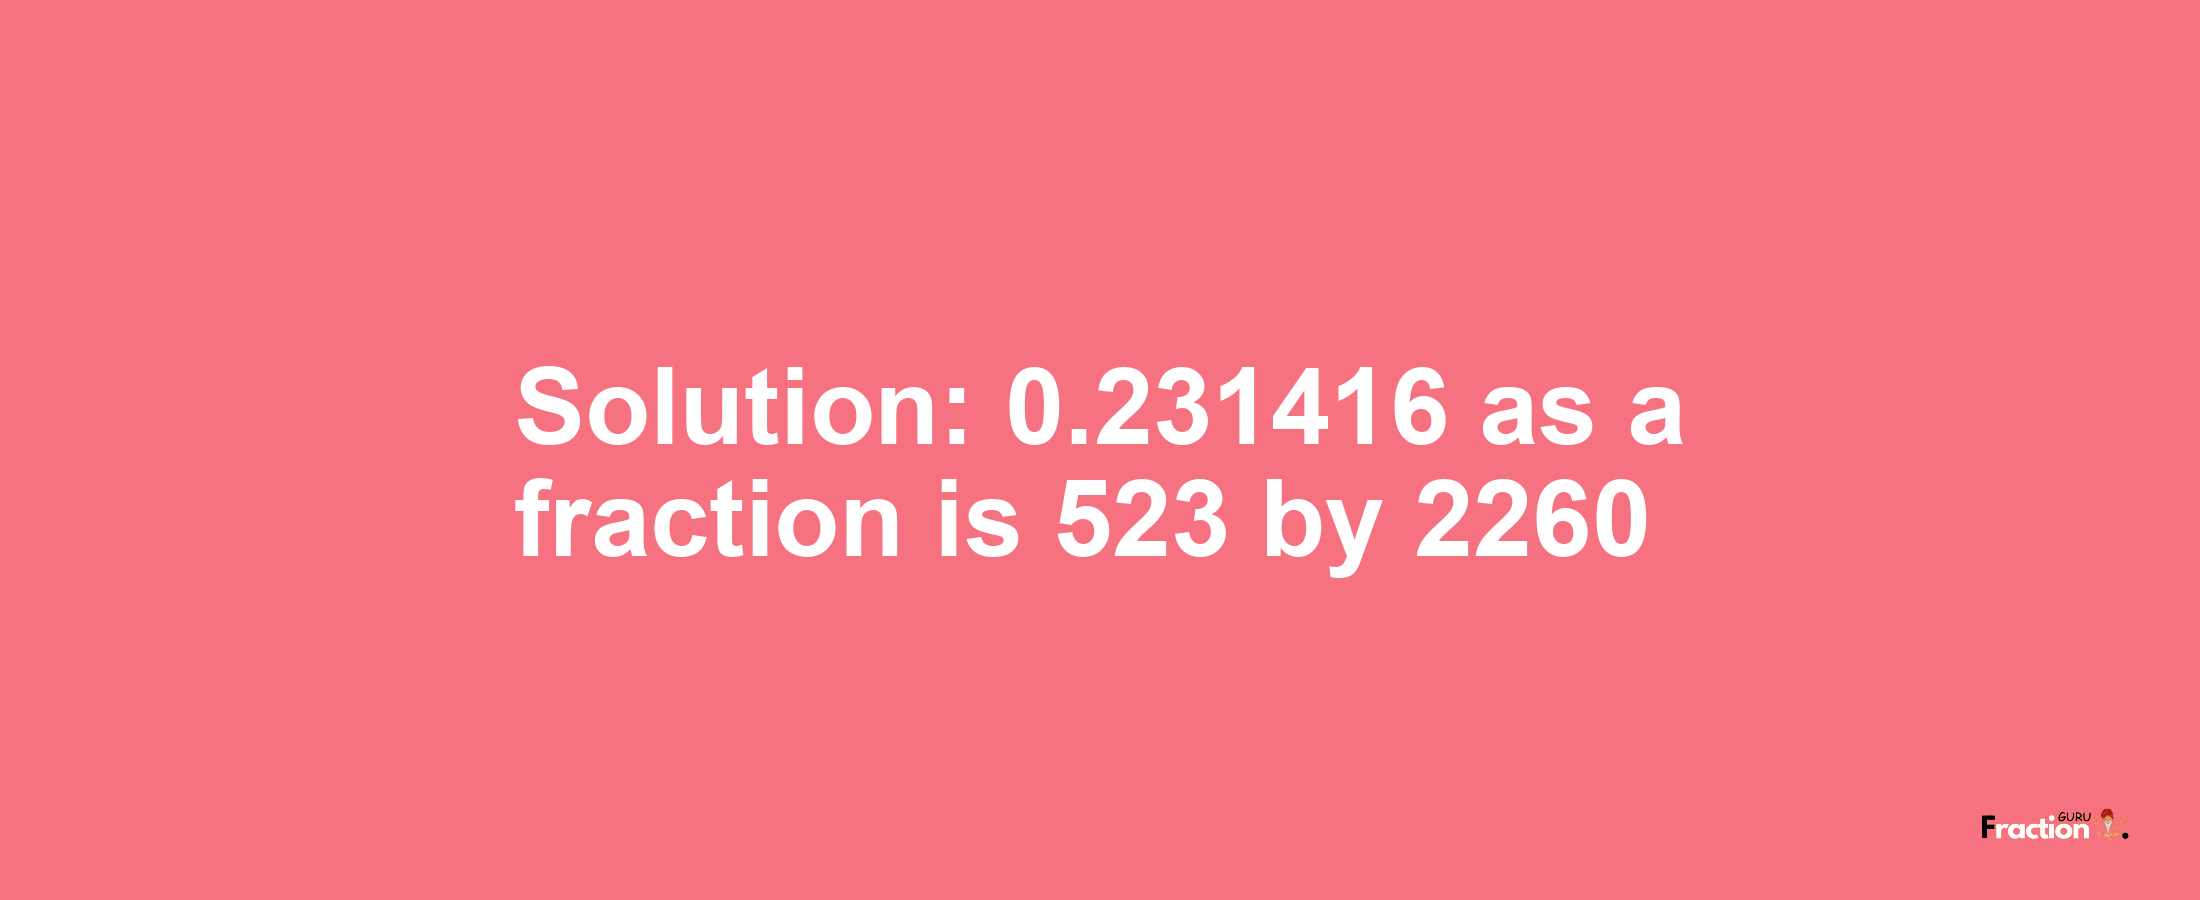 Solution:0.231416 as a fraction is 523/2260